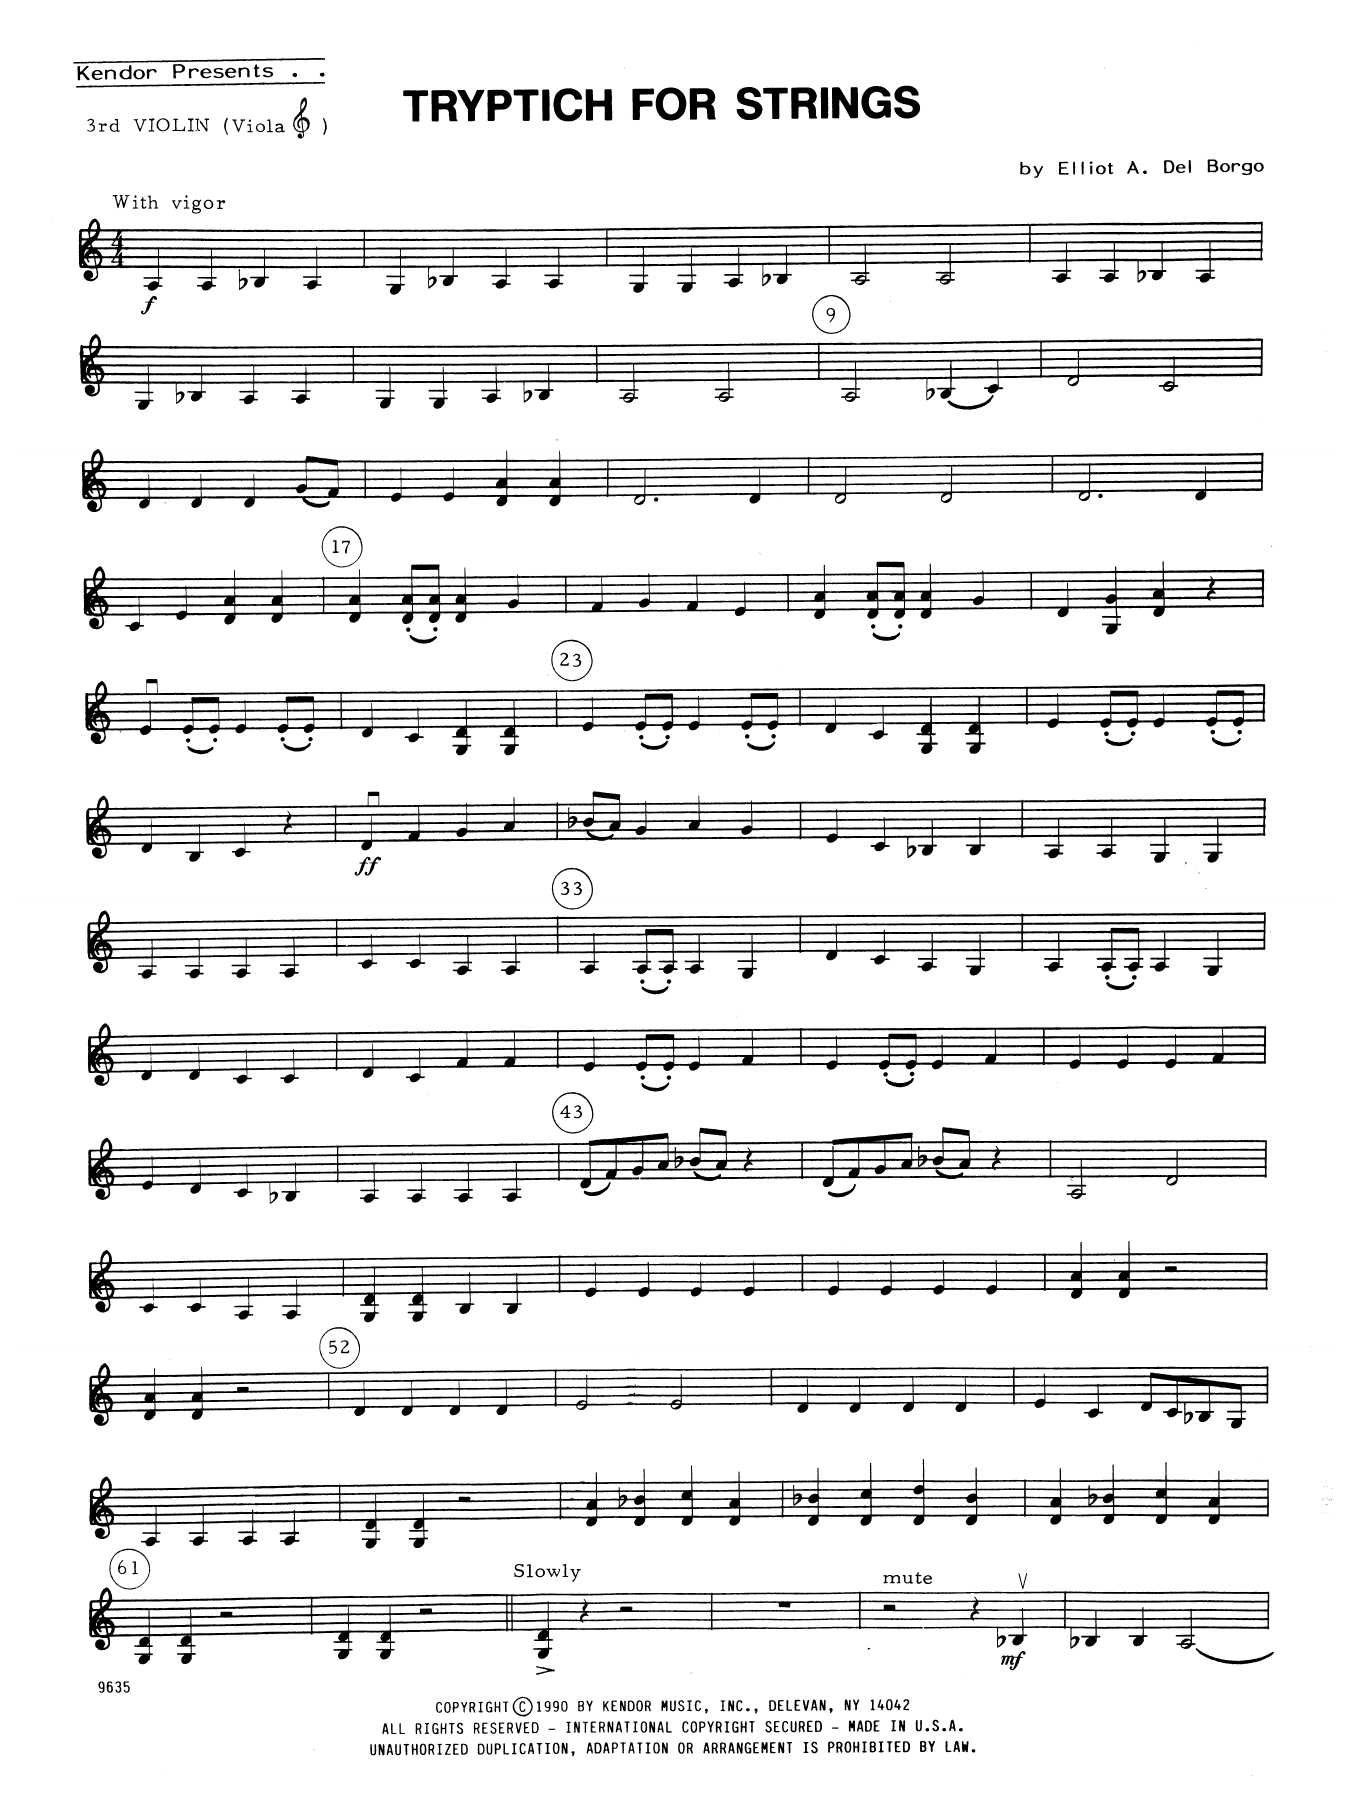 Download Elliot A. Del Borgo Tryptich For Strings - 3rd Violin Sheet Music